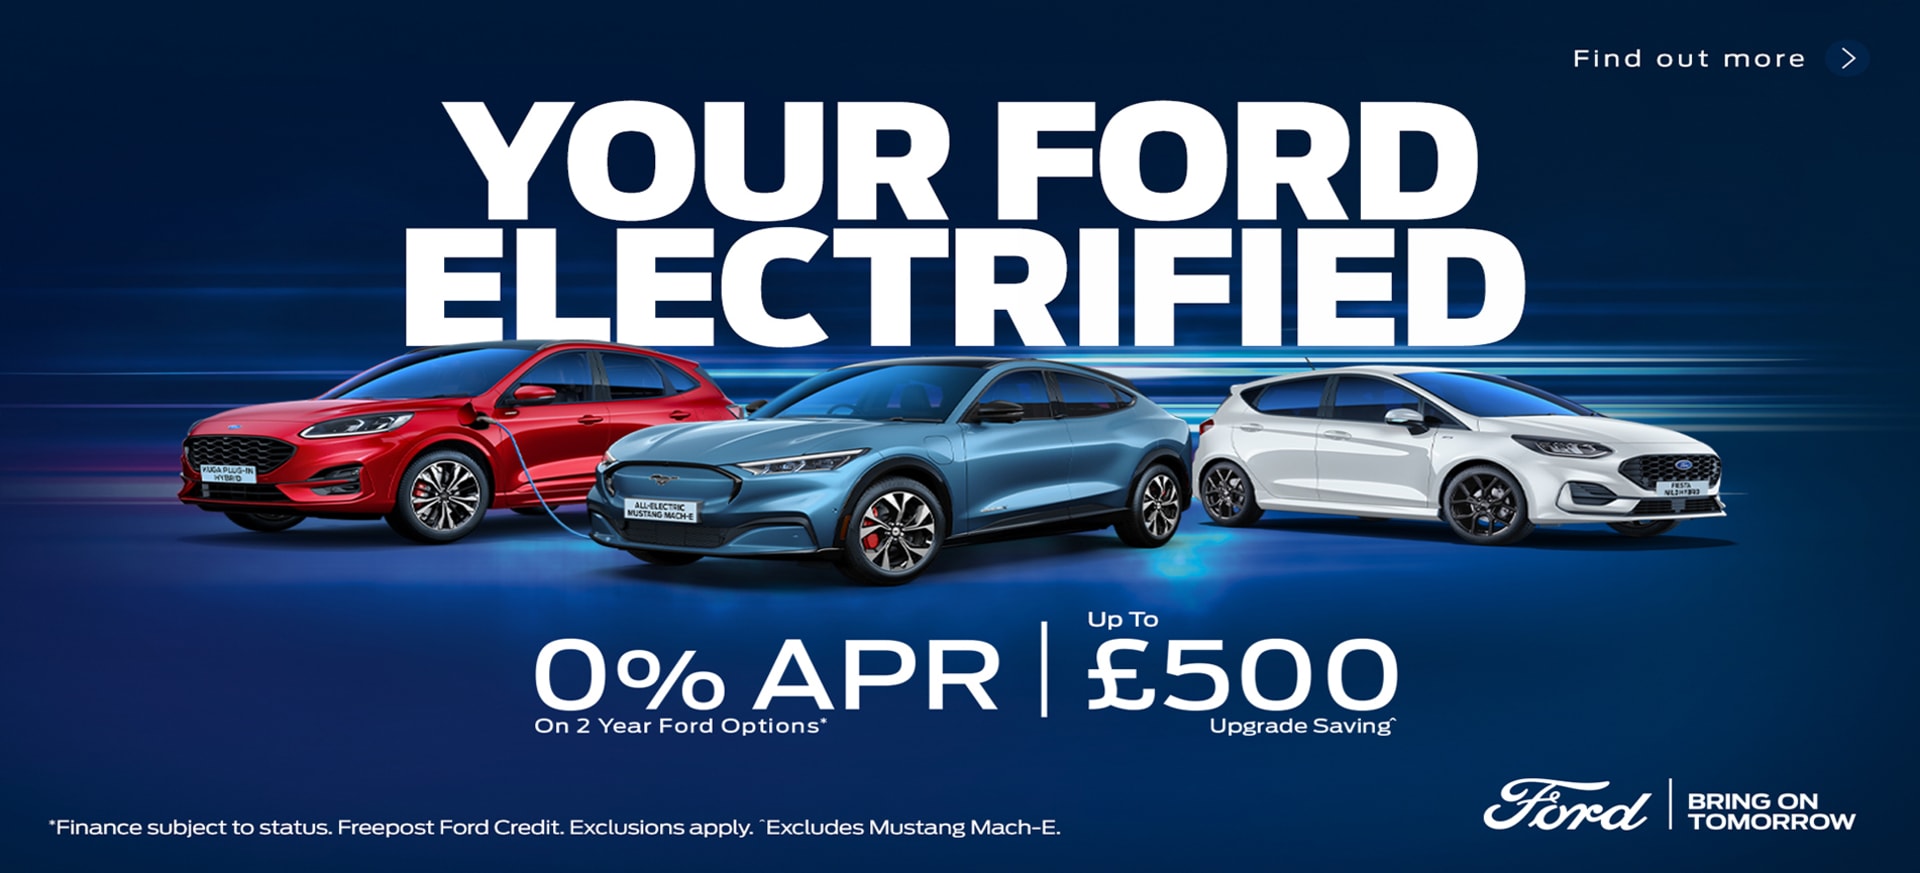 YOUR FORD ELECTRIFIED